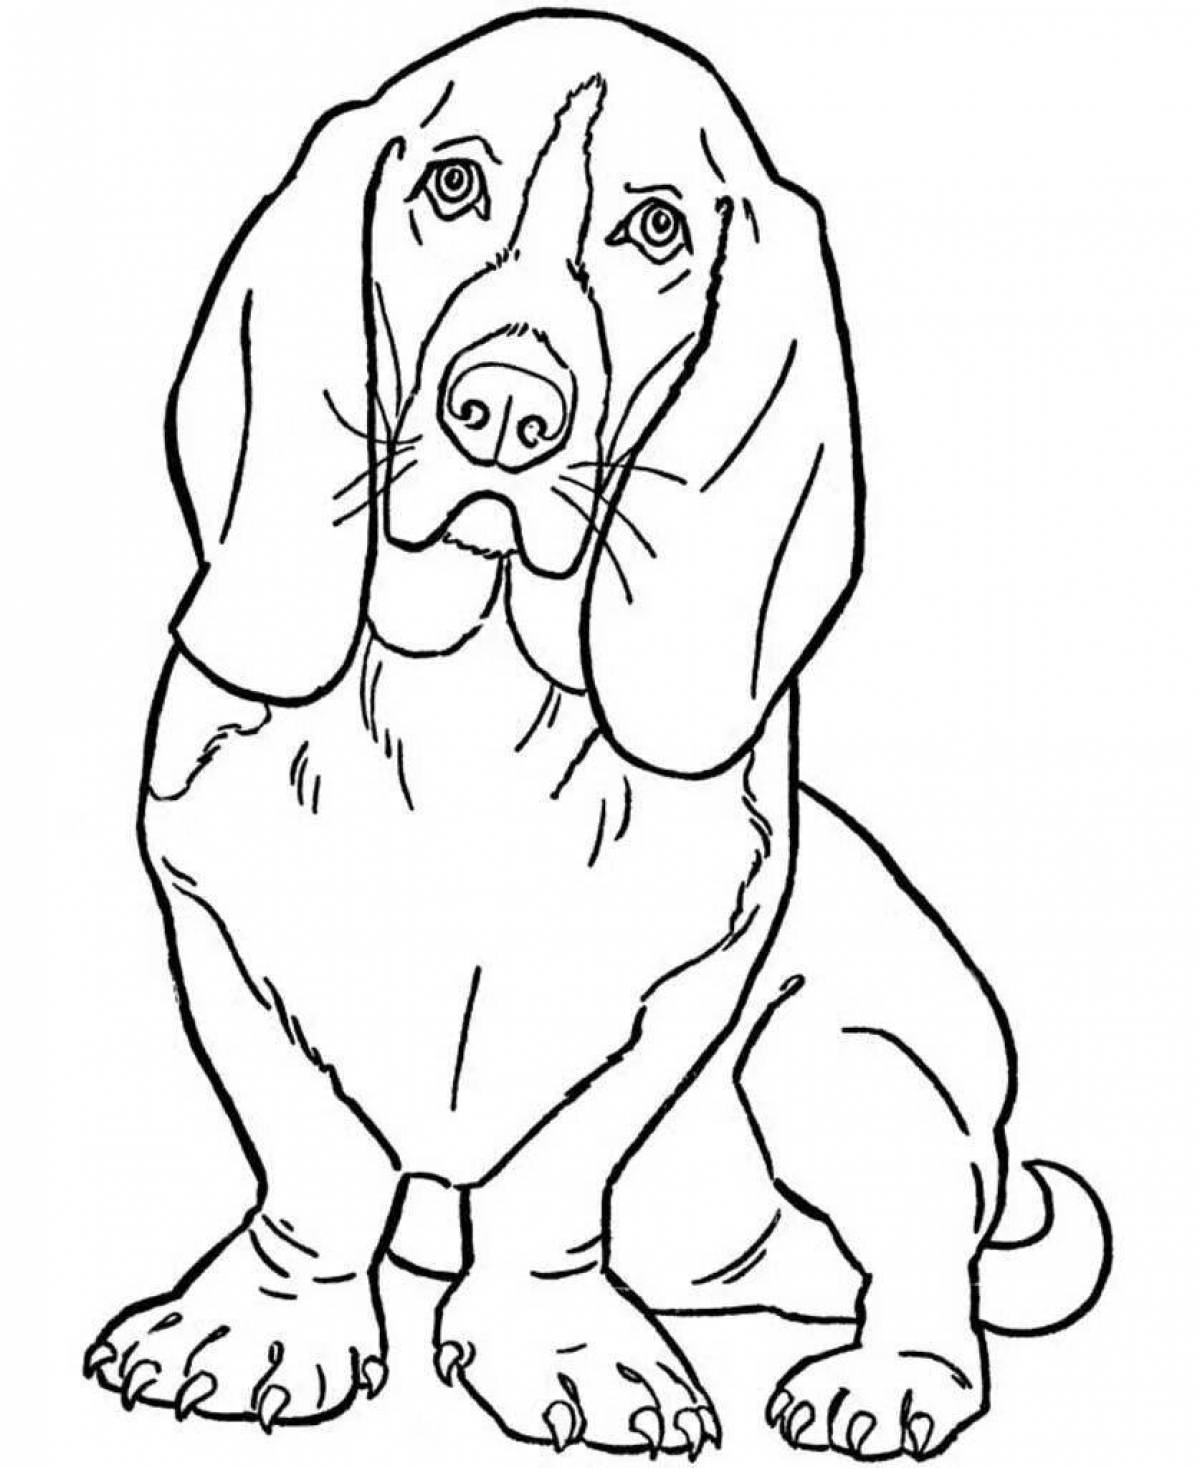 Playful dog coloring for boys